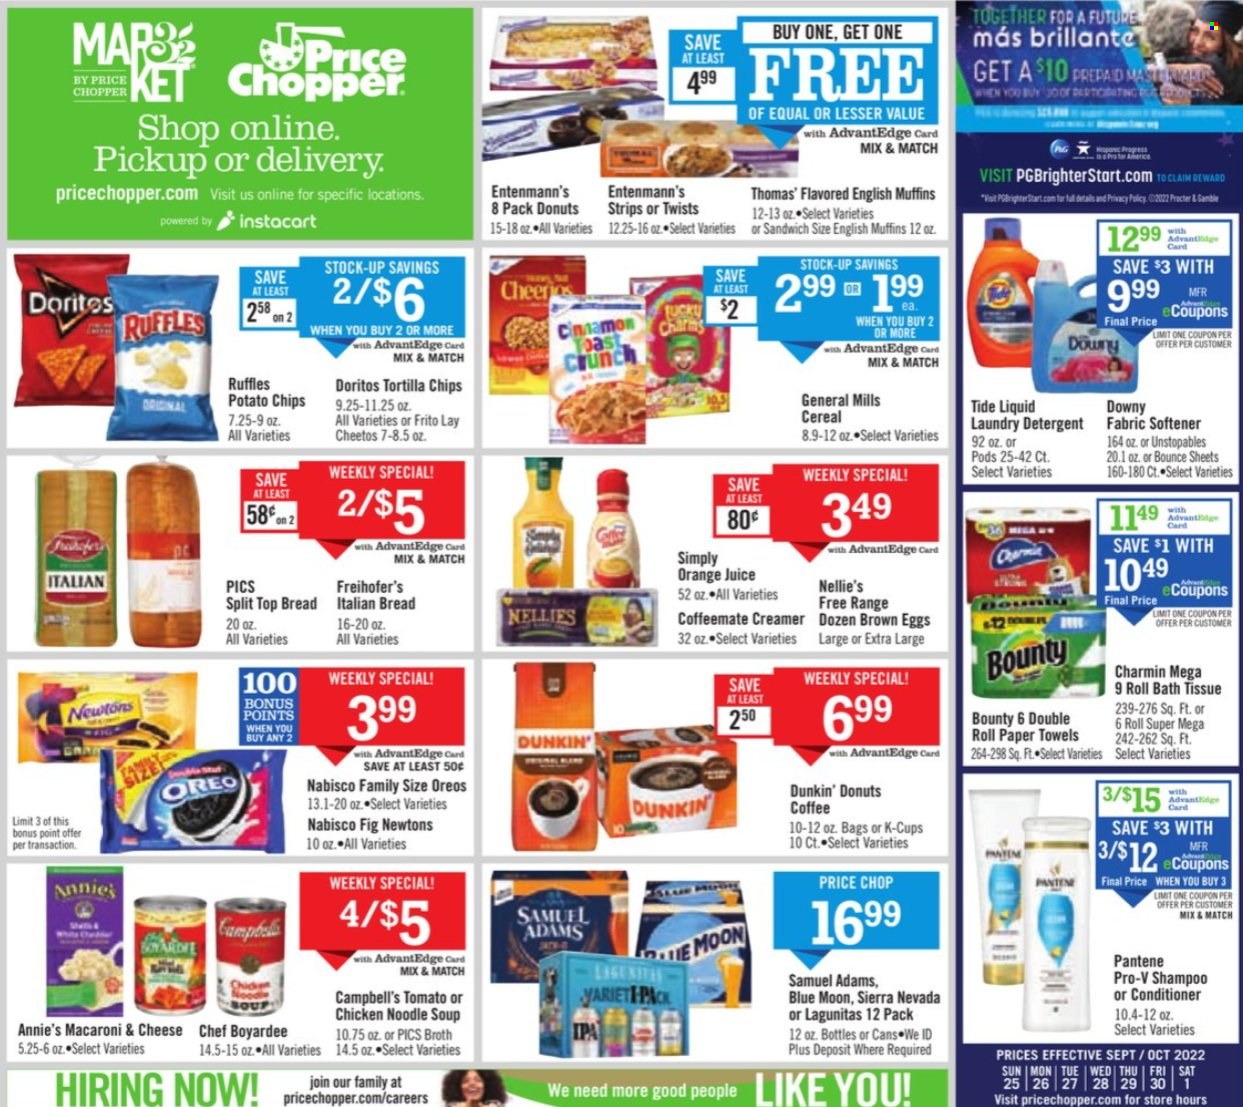 thumbnail - Price Chopper Flyer - 09/25/2022 - 10/01/2022 - Sales products - bread, english muffins, Dunkin' Donuts, Entenmann's, Campbell's, macaroni & cheese, chicken soup, sandwich, soup, noodles cup, noodles, Annie's, Oreo, eggs, creamer, strips, Bounty, Doritos, tortilla chips, potato chips, Cheetos, chips, Ruffles, broth, Chef Boyardee, cereals, cinnamon, orange juice, juice, coffee, coffee capsules, K-Cups, beer, bath tissue, kitchen towels, paper towels, Charmin, detergent, Tide, Unstopables, fabric softener, laundry detergent, Bounce, Downy Laundry, shampoo, conditioner, Pantene, handy chopper, Blue Moon. Page 12.